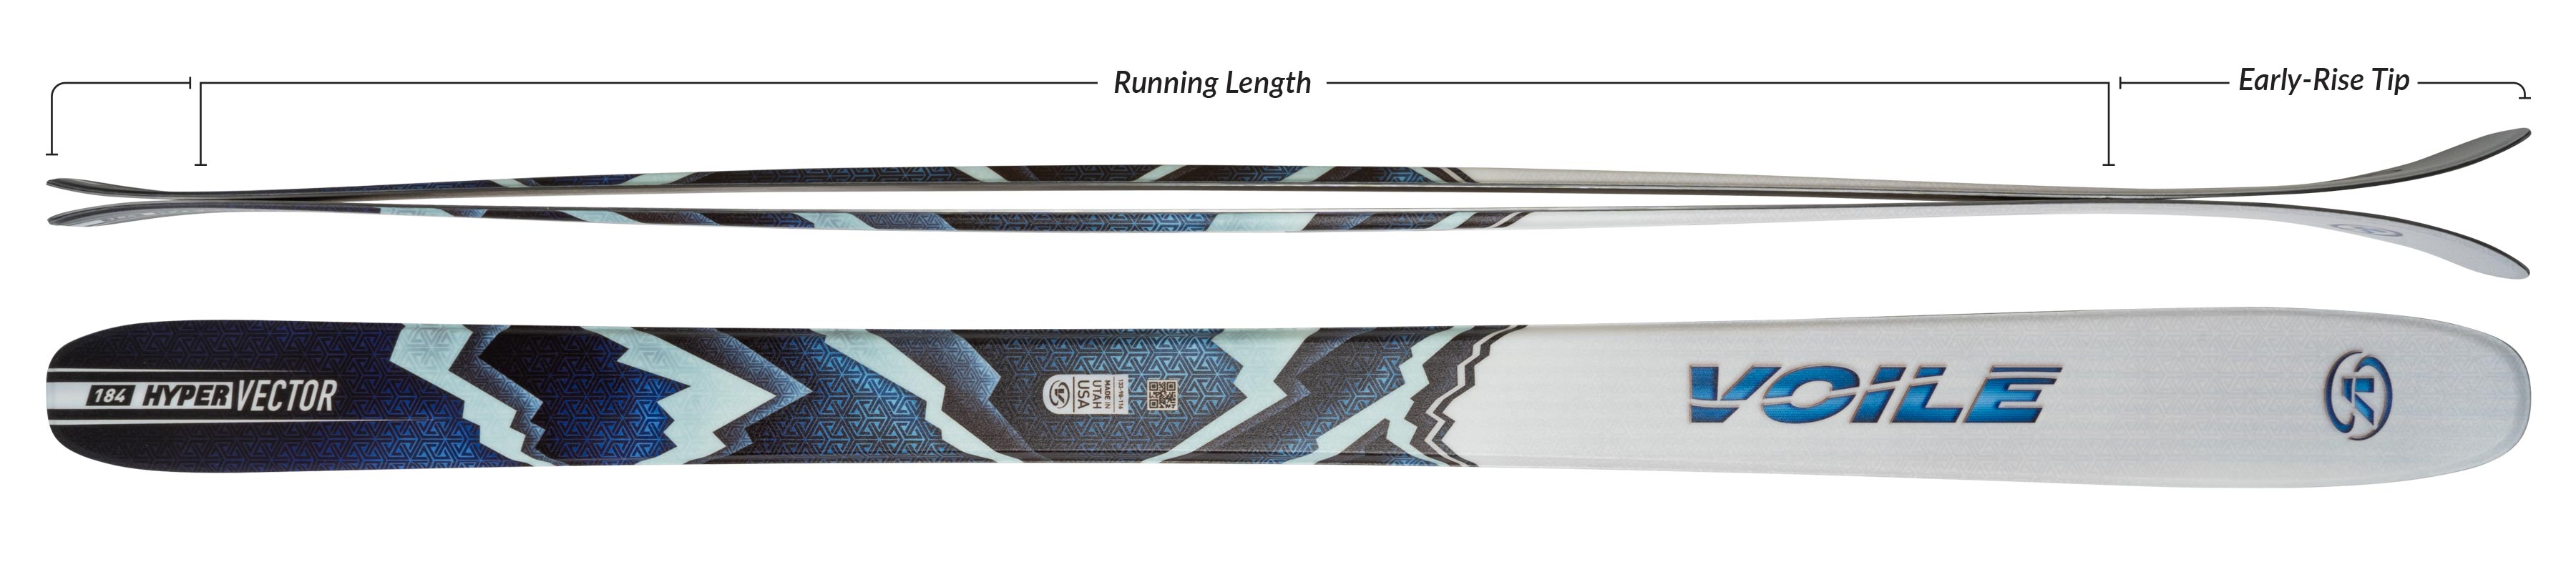 Voile HyperVector Skis Camber Profile